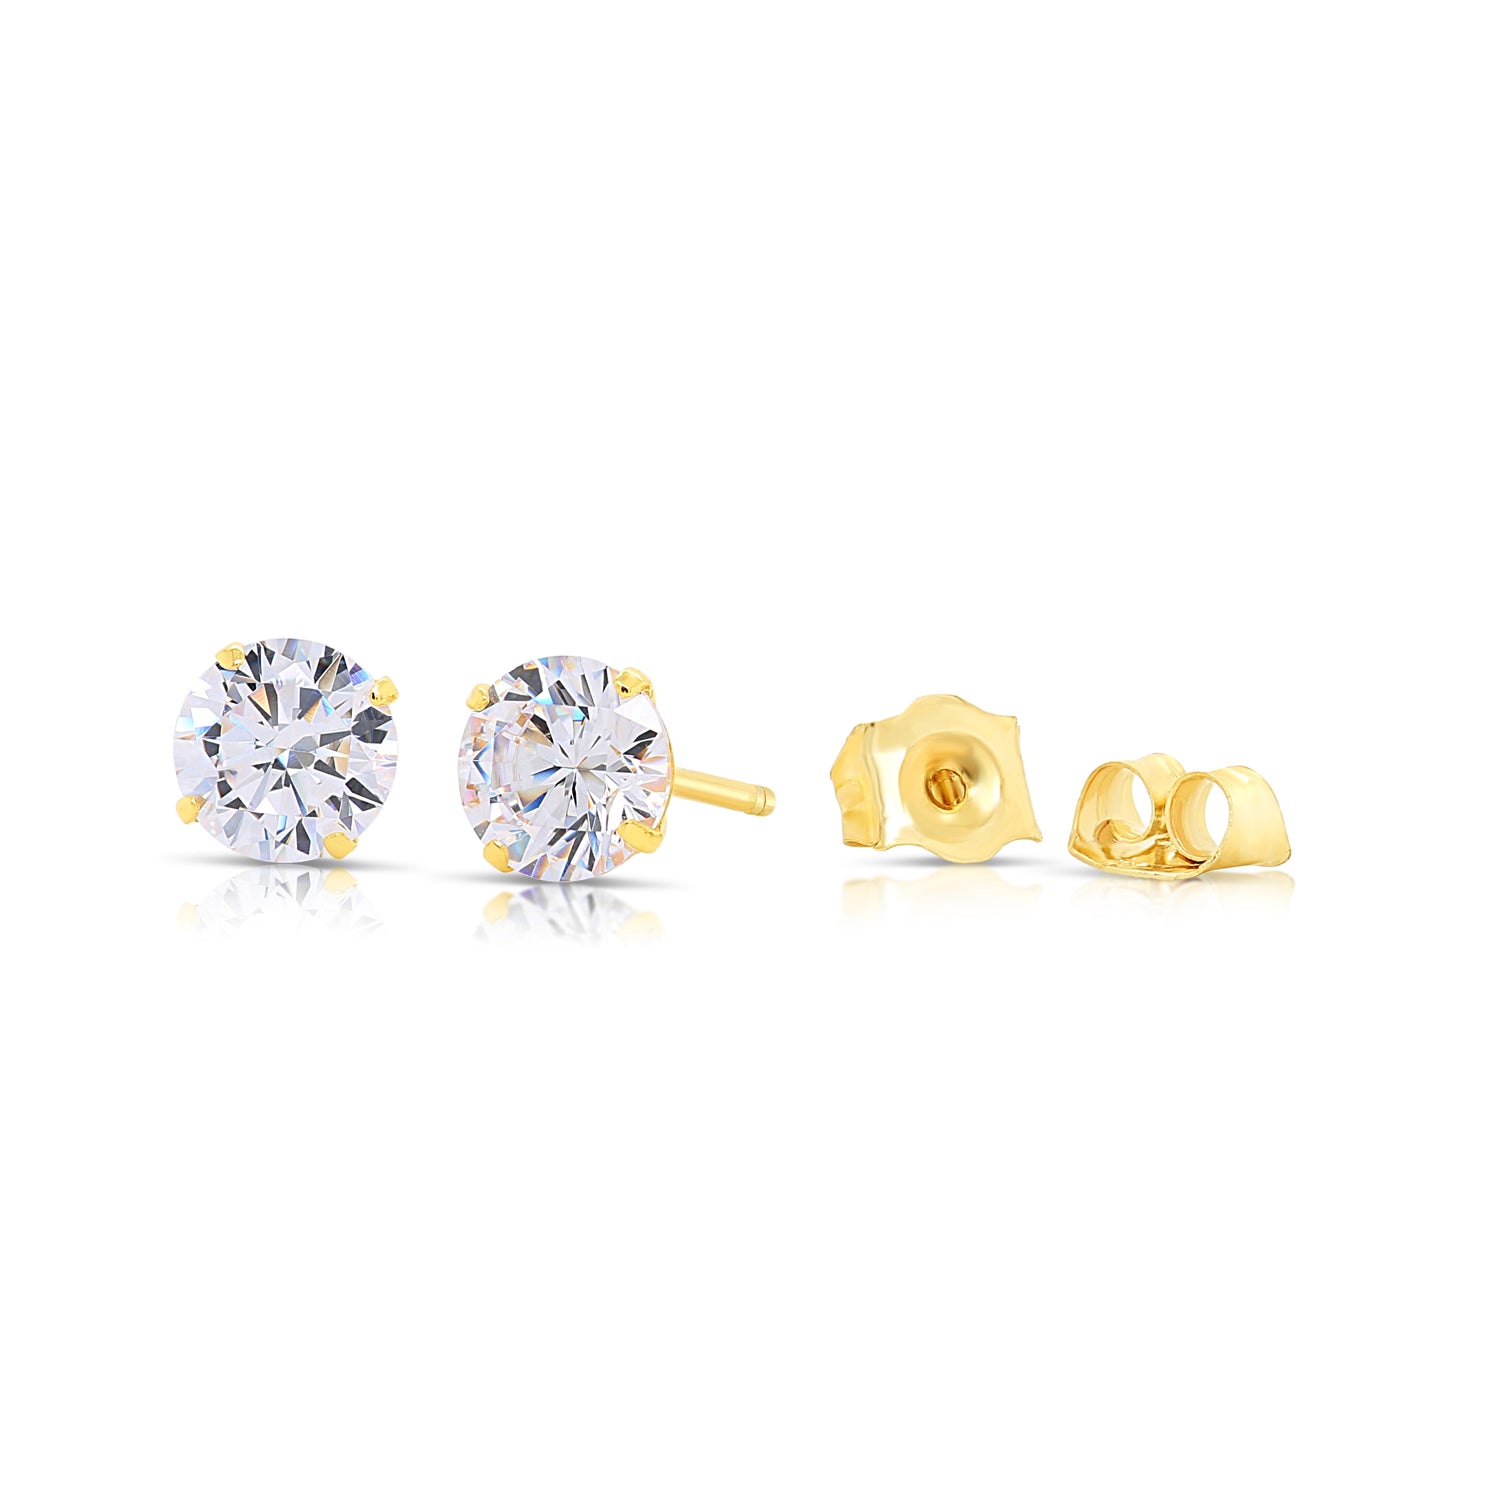 14K White Gold Round CZ Stud Earrings with Butterfly Pushbacks for Women, Men, and Girls - Real Solid Gold Solitaire Design